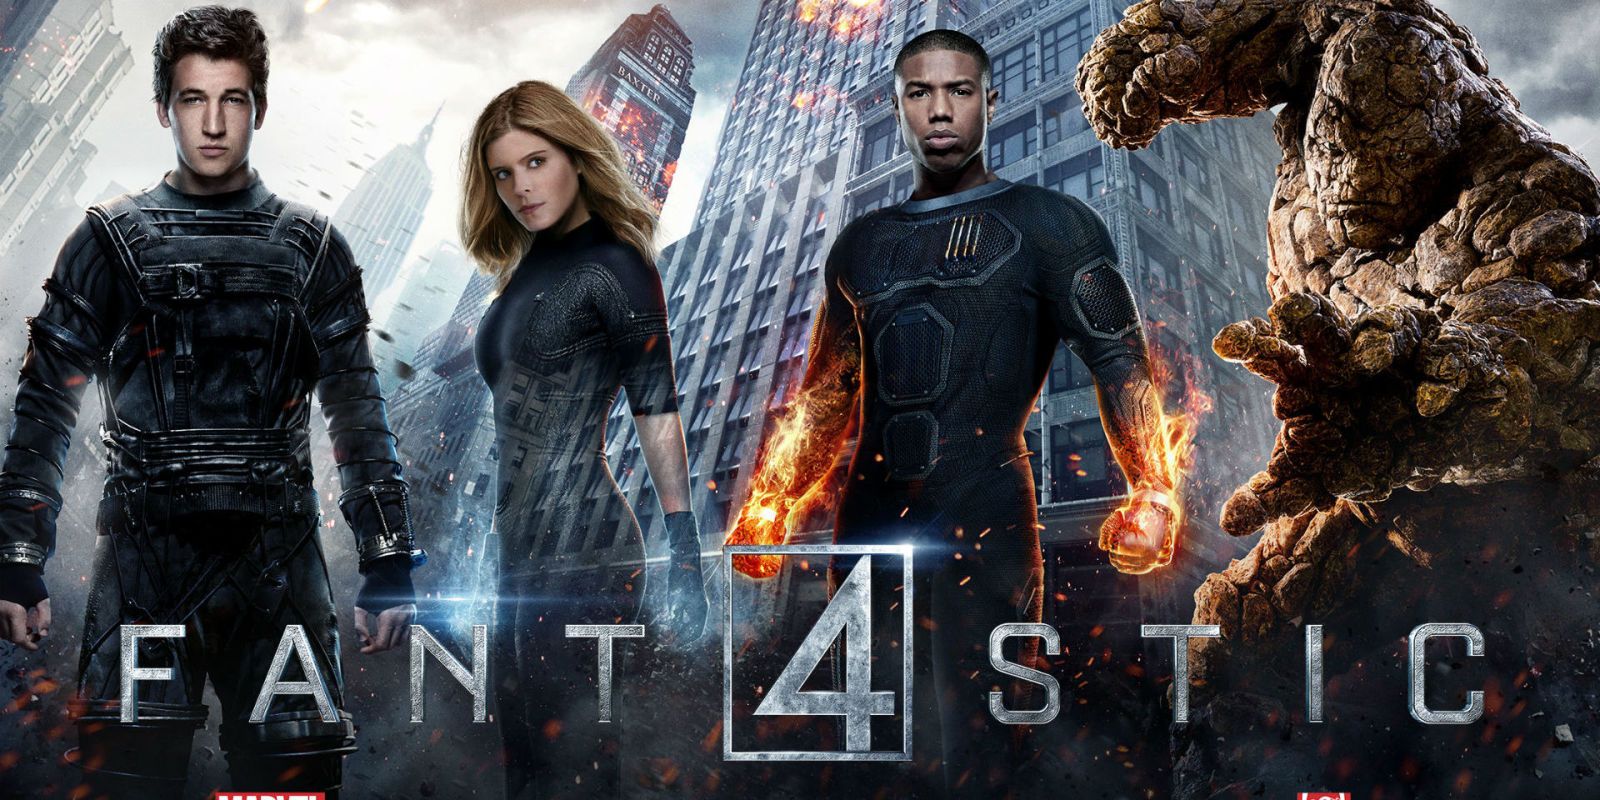 How would you fix the Fantastic Four? Comics, Movies & More.